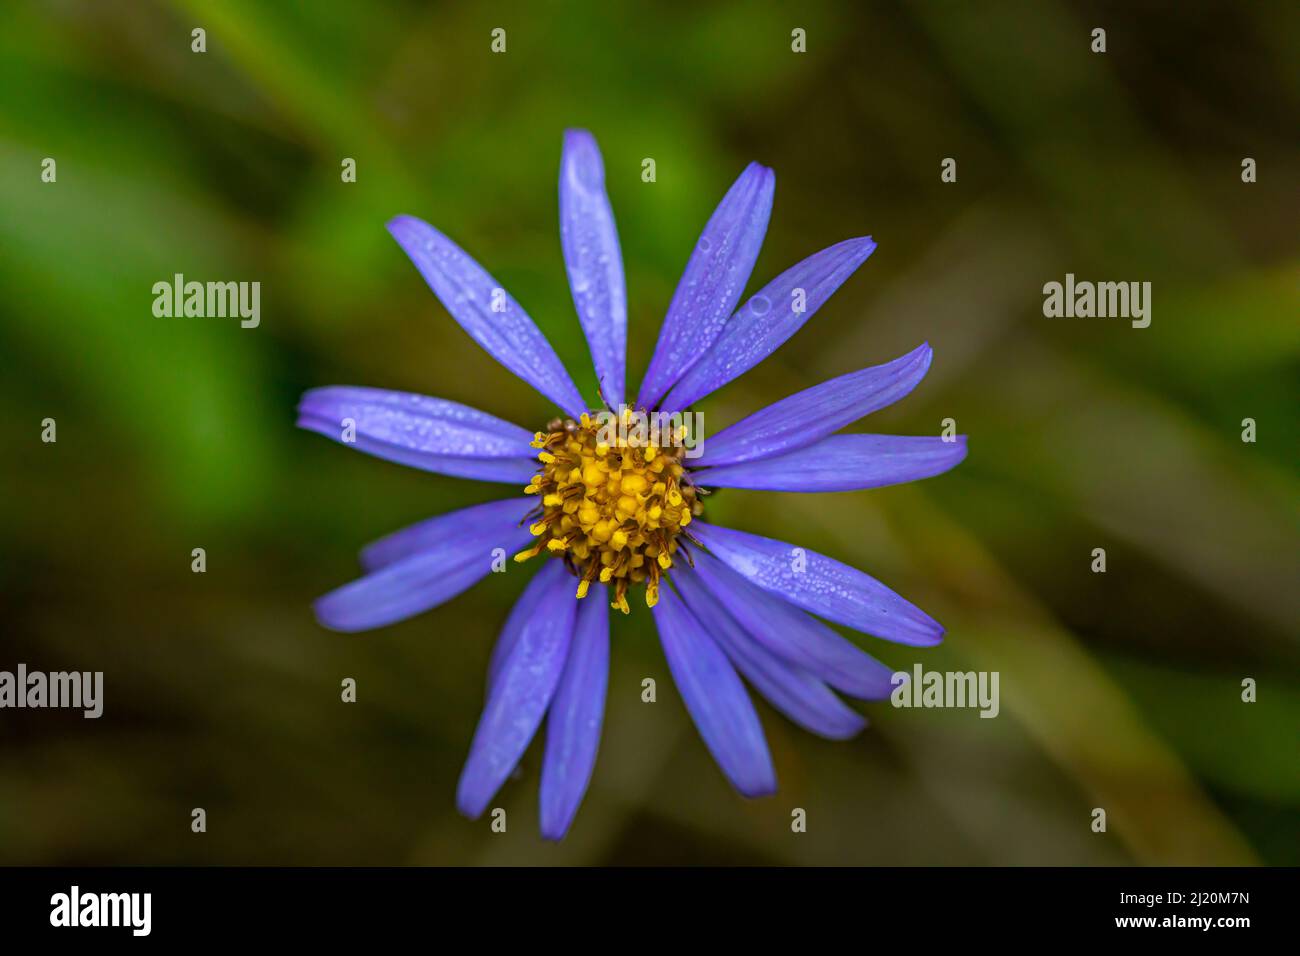 Aster amellus flower growing in mountains, close up shoot Stock Photo